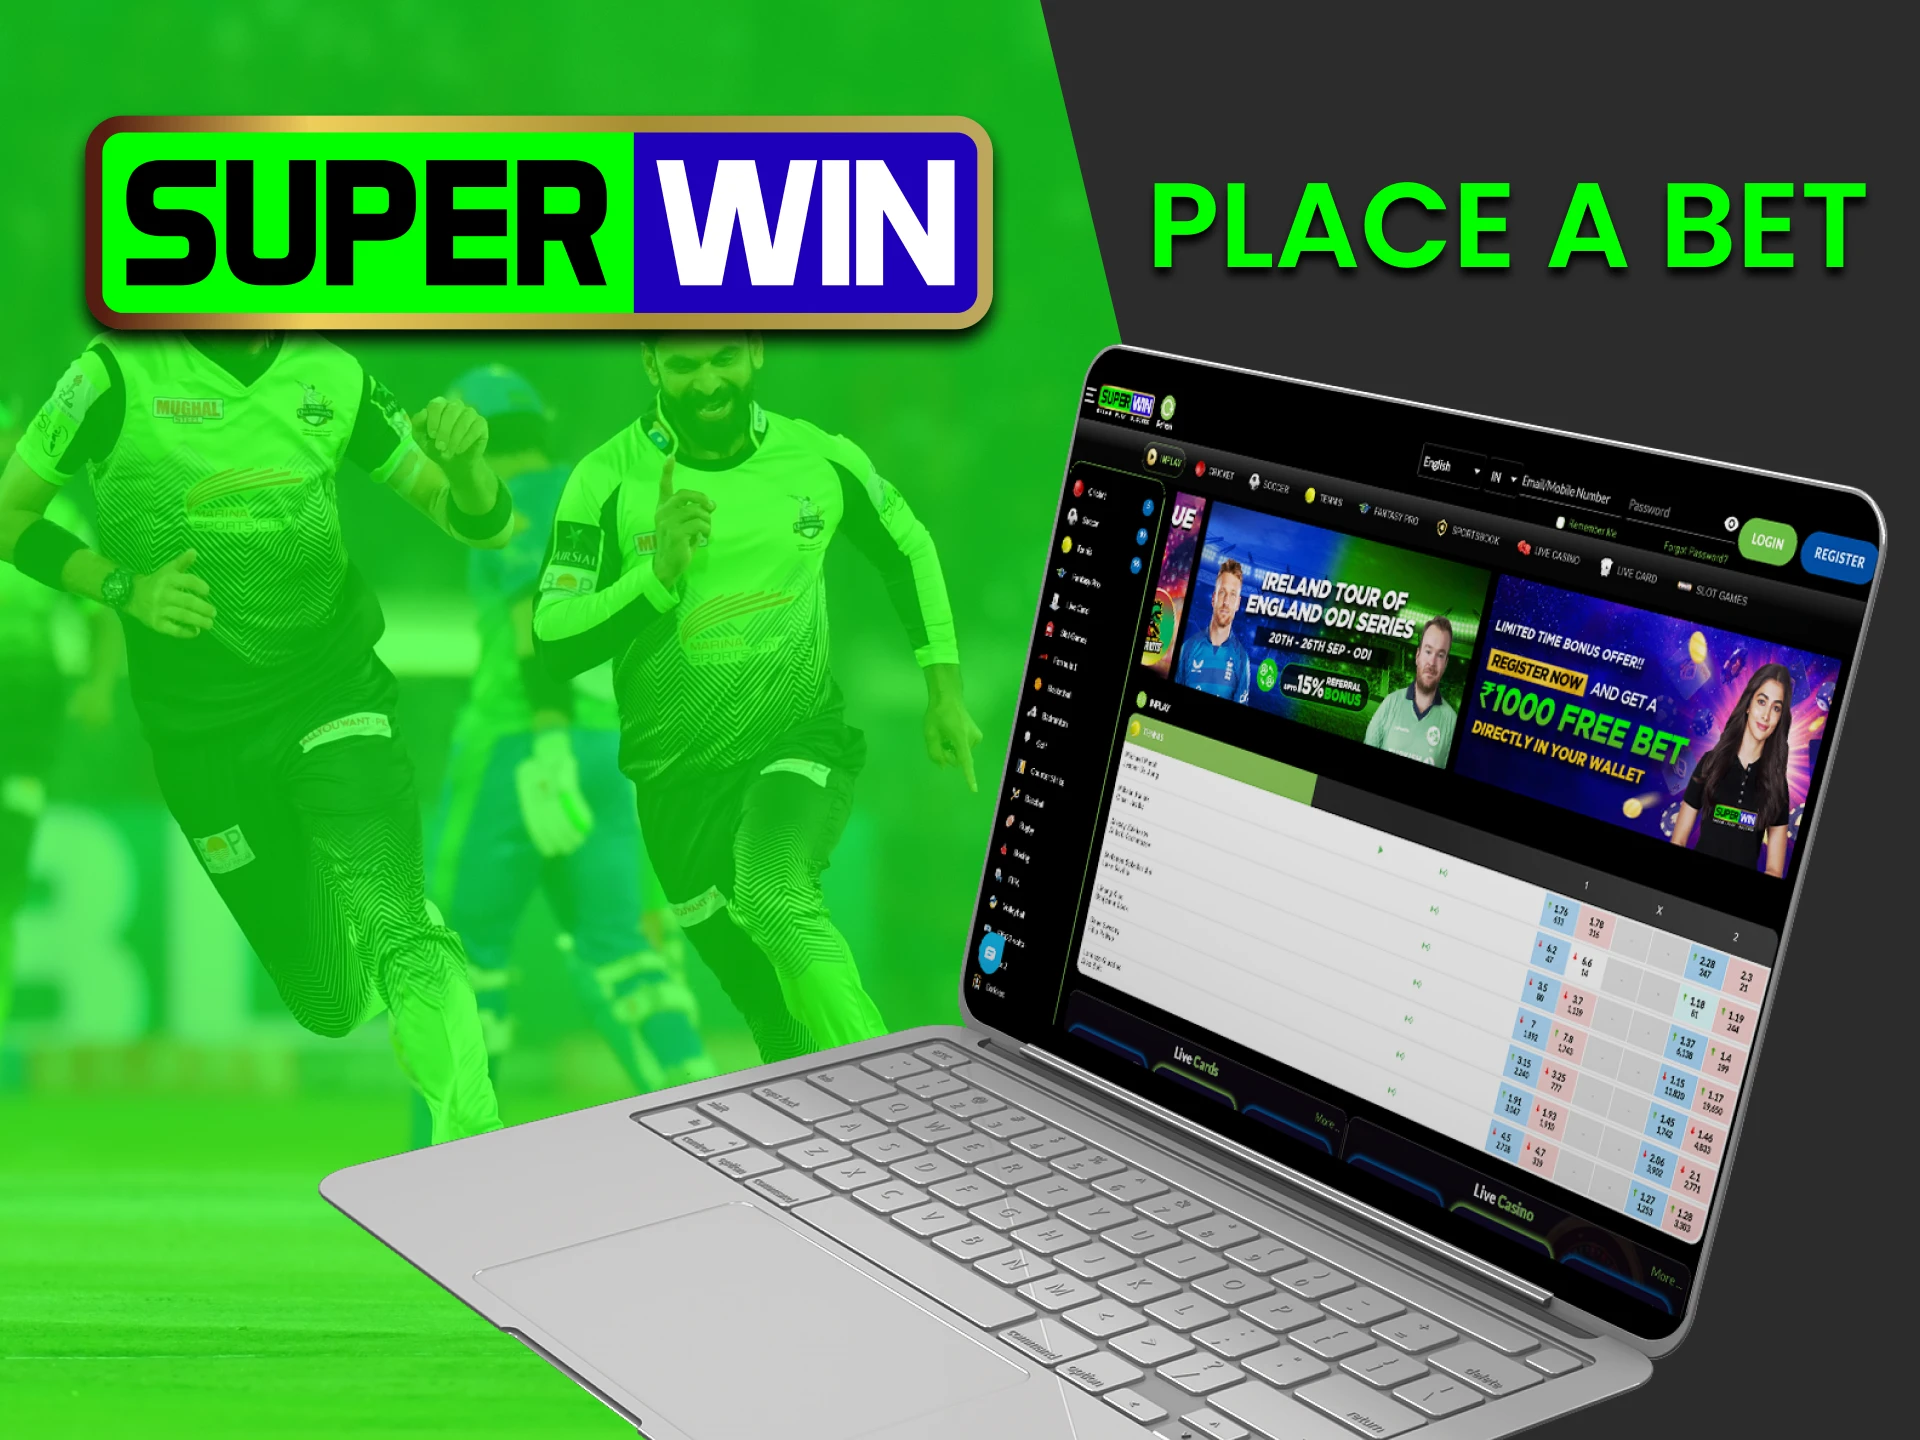 We will tell you how to start betting on sports with Superwin.